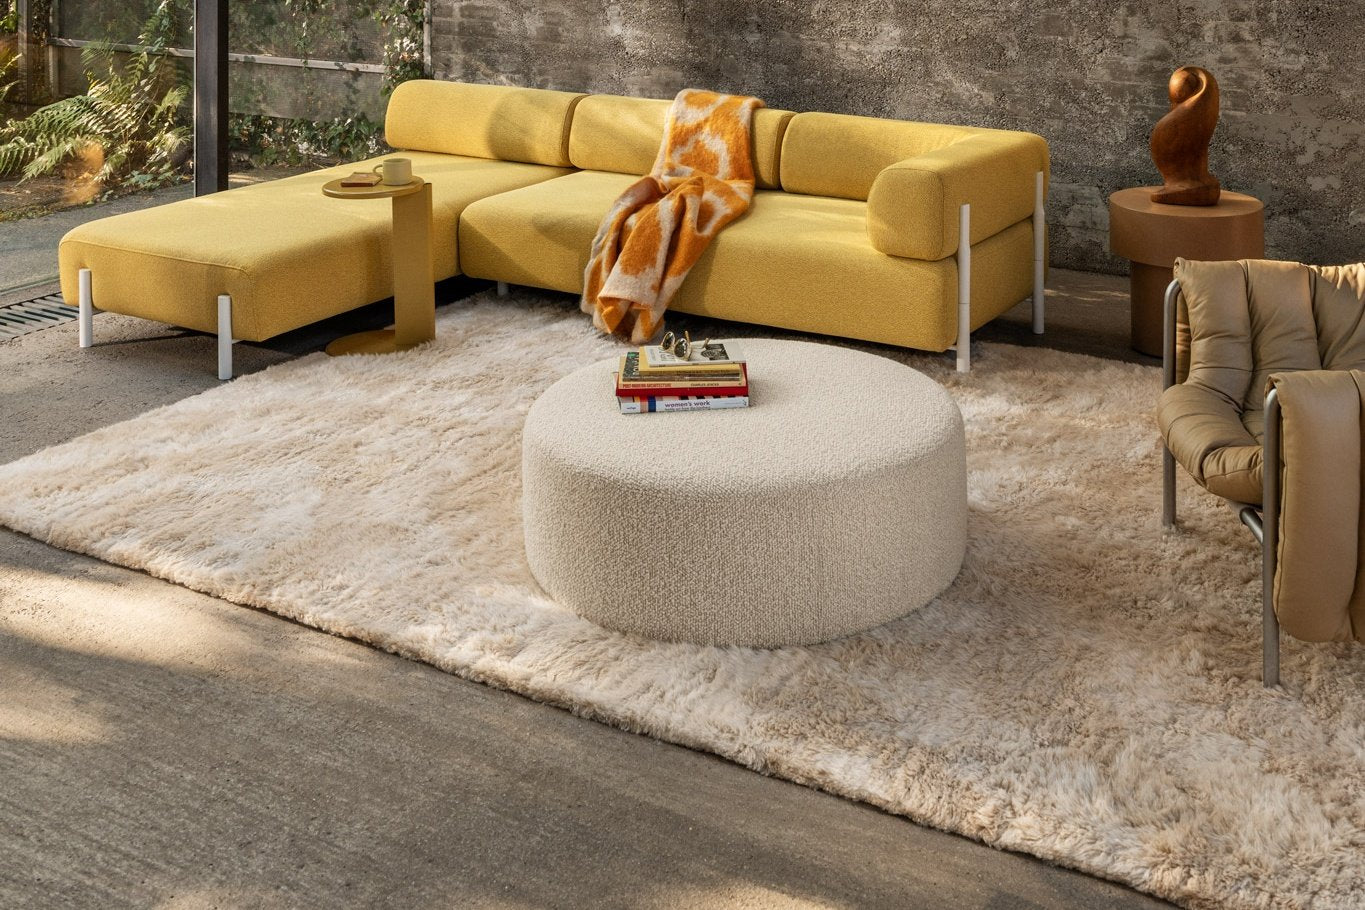 A living room scene featuring Palo Modular Corner Soft Left Sunflower, Lolly Side Table Ochre Yellow, Monster Throw Ochre / Off-White Ring, Monster Rug Beige / Off-White, Bon Pouf Round Large Eggshell, Stump Side Table Natural, and a Puffy Lounge Chair.